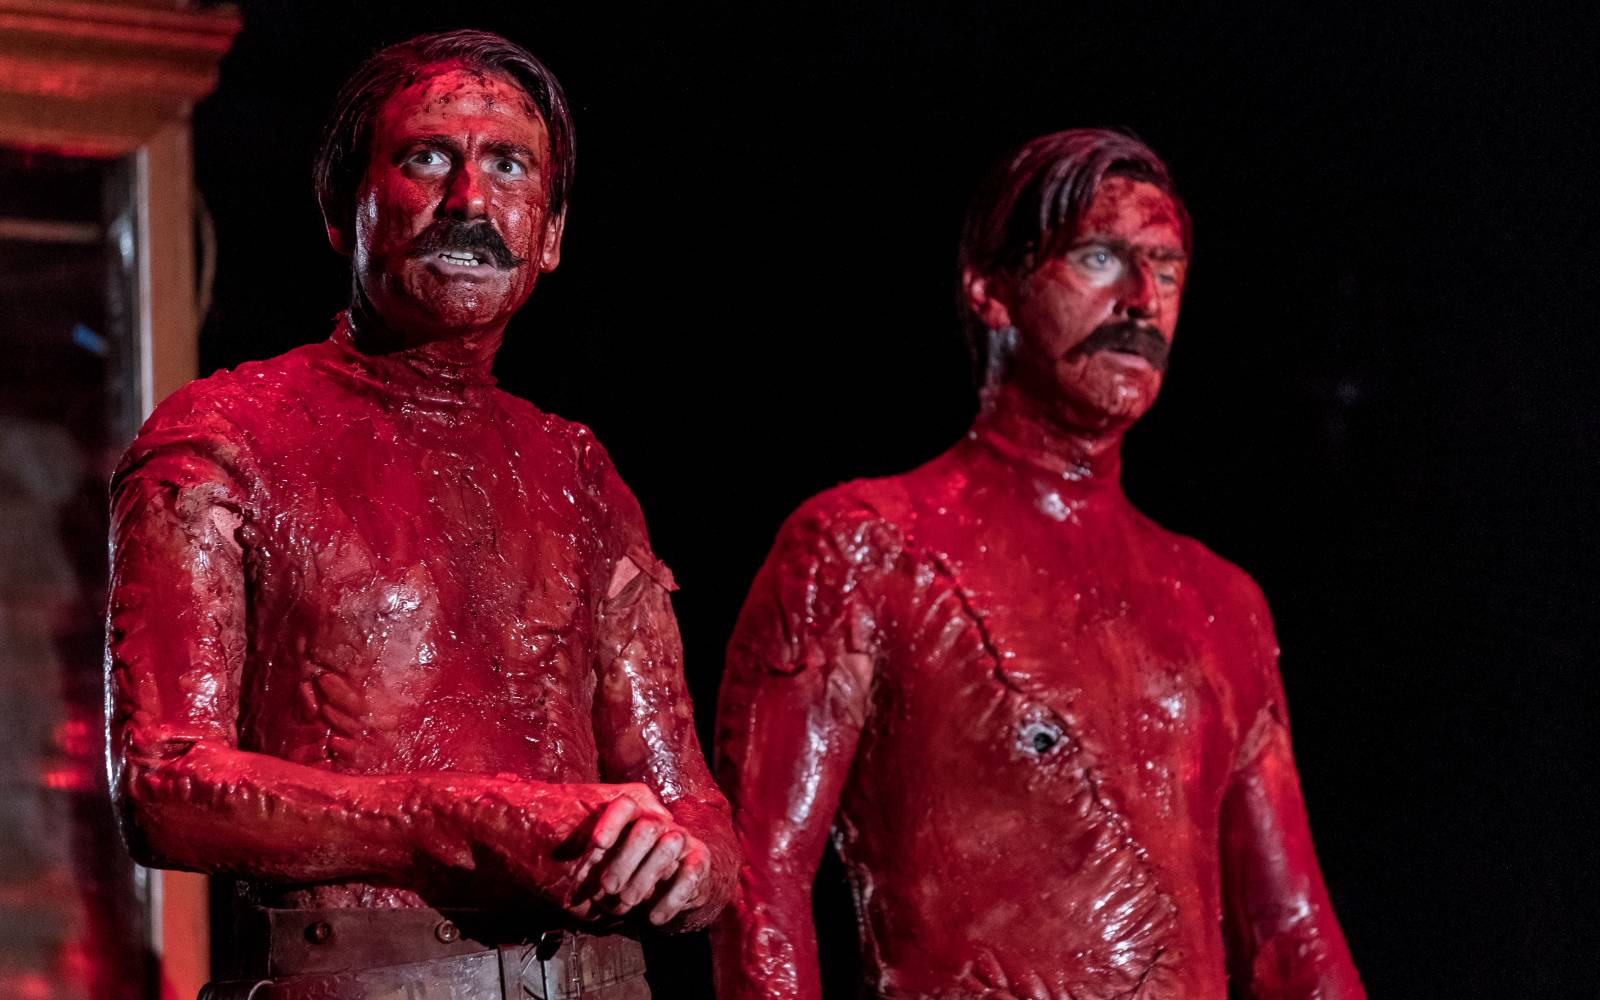 Two topless men, covered all over in blood. Their bodies are riddled with scars